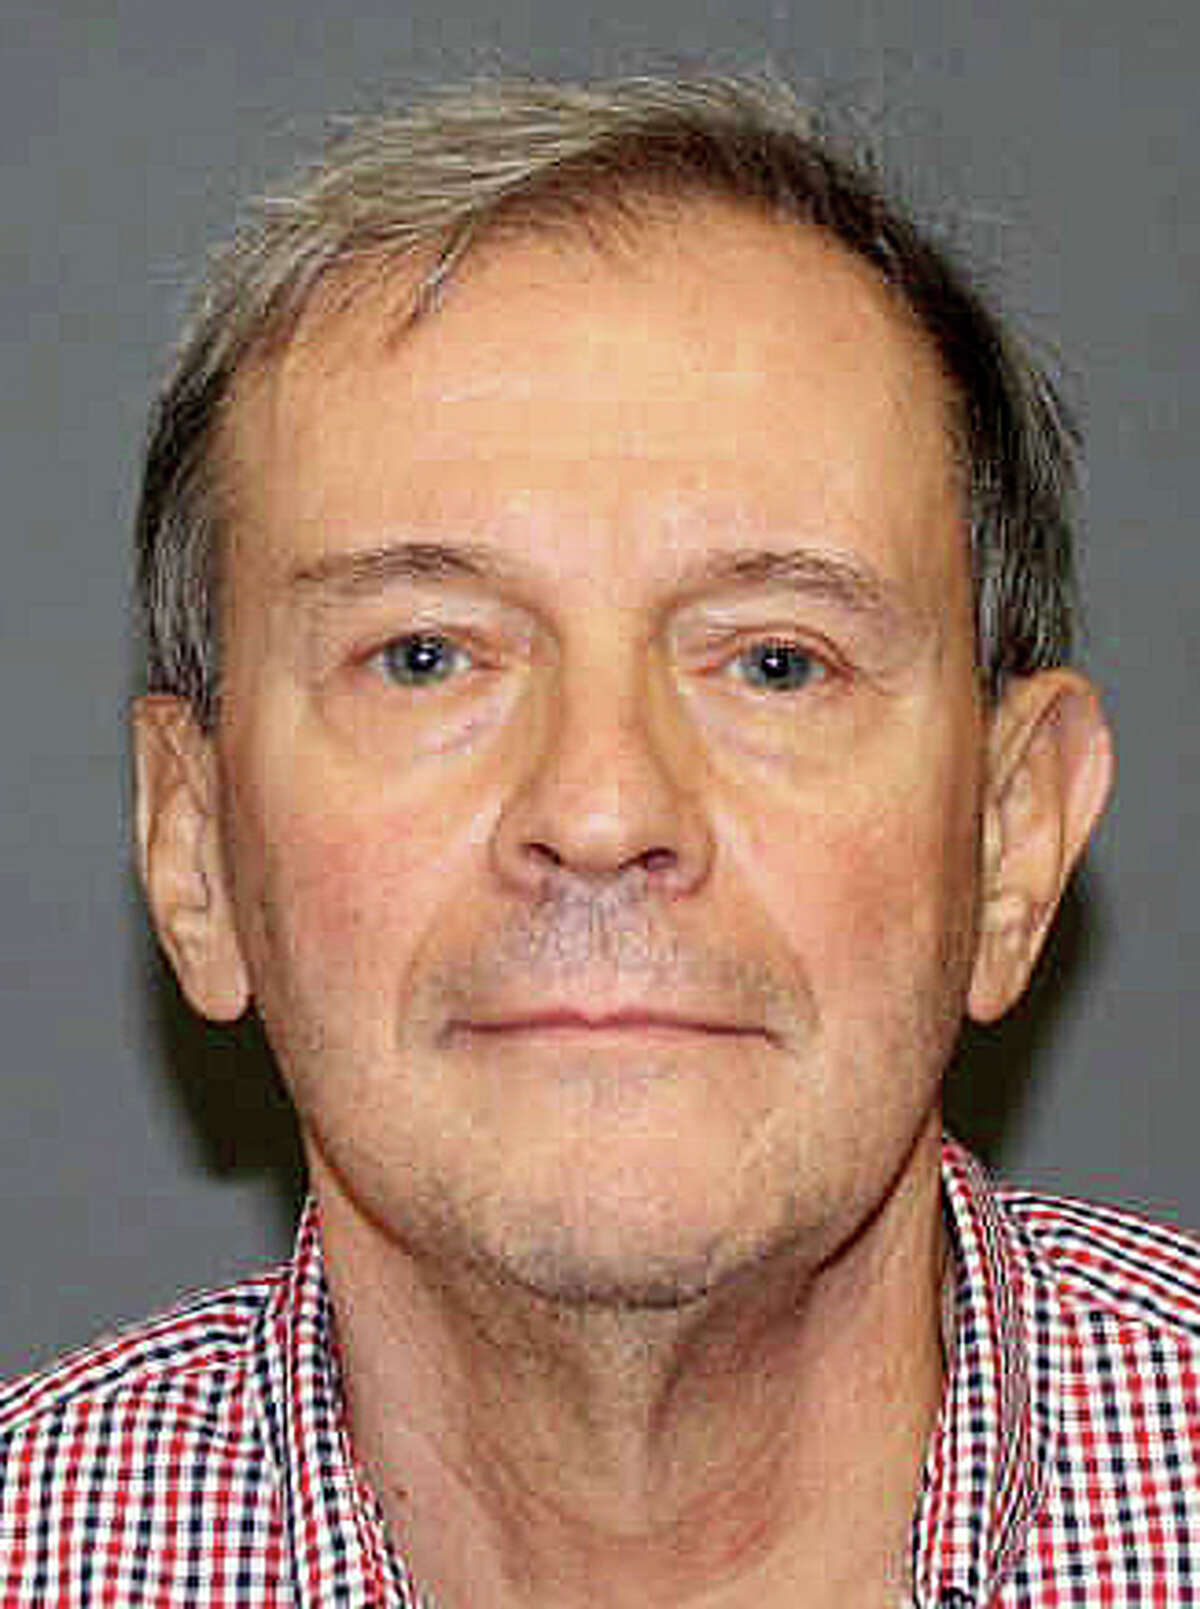 Joseph C. Callahan, 69, was charged Monday with 11 counts llegal possession of explosives and several other charges in connection with a hazmat incident last week at his 1625 Bronson Road property where police said they found a cache of potentially explosive materials as well as guns, ammunition and chemicals.